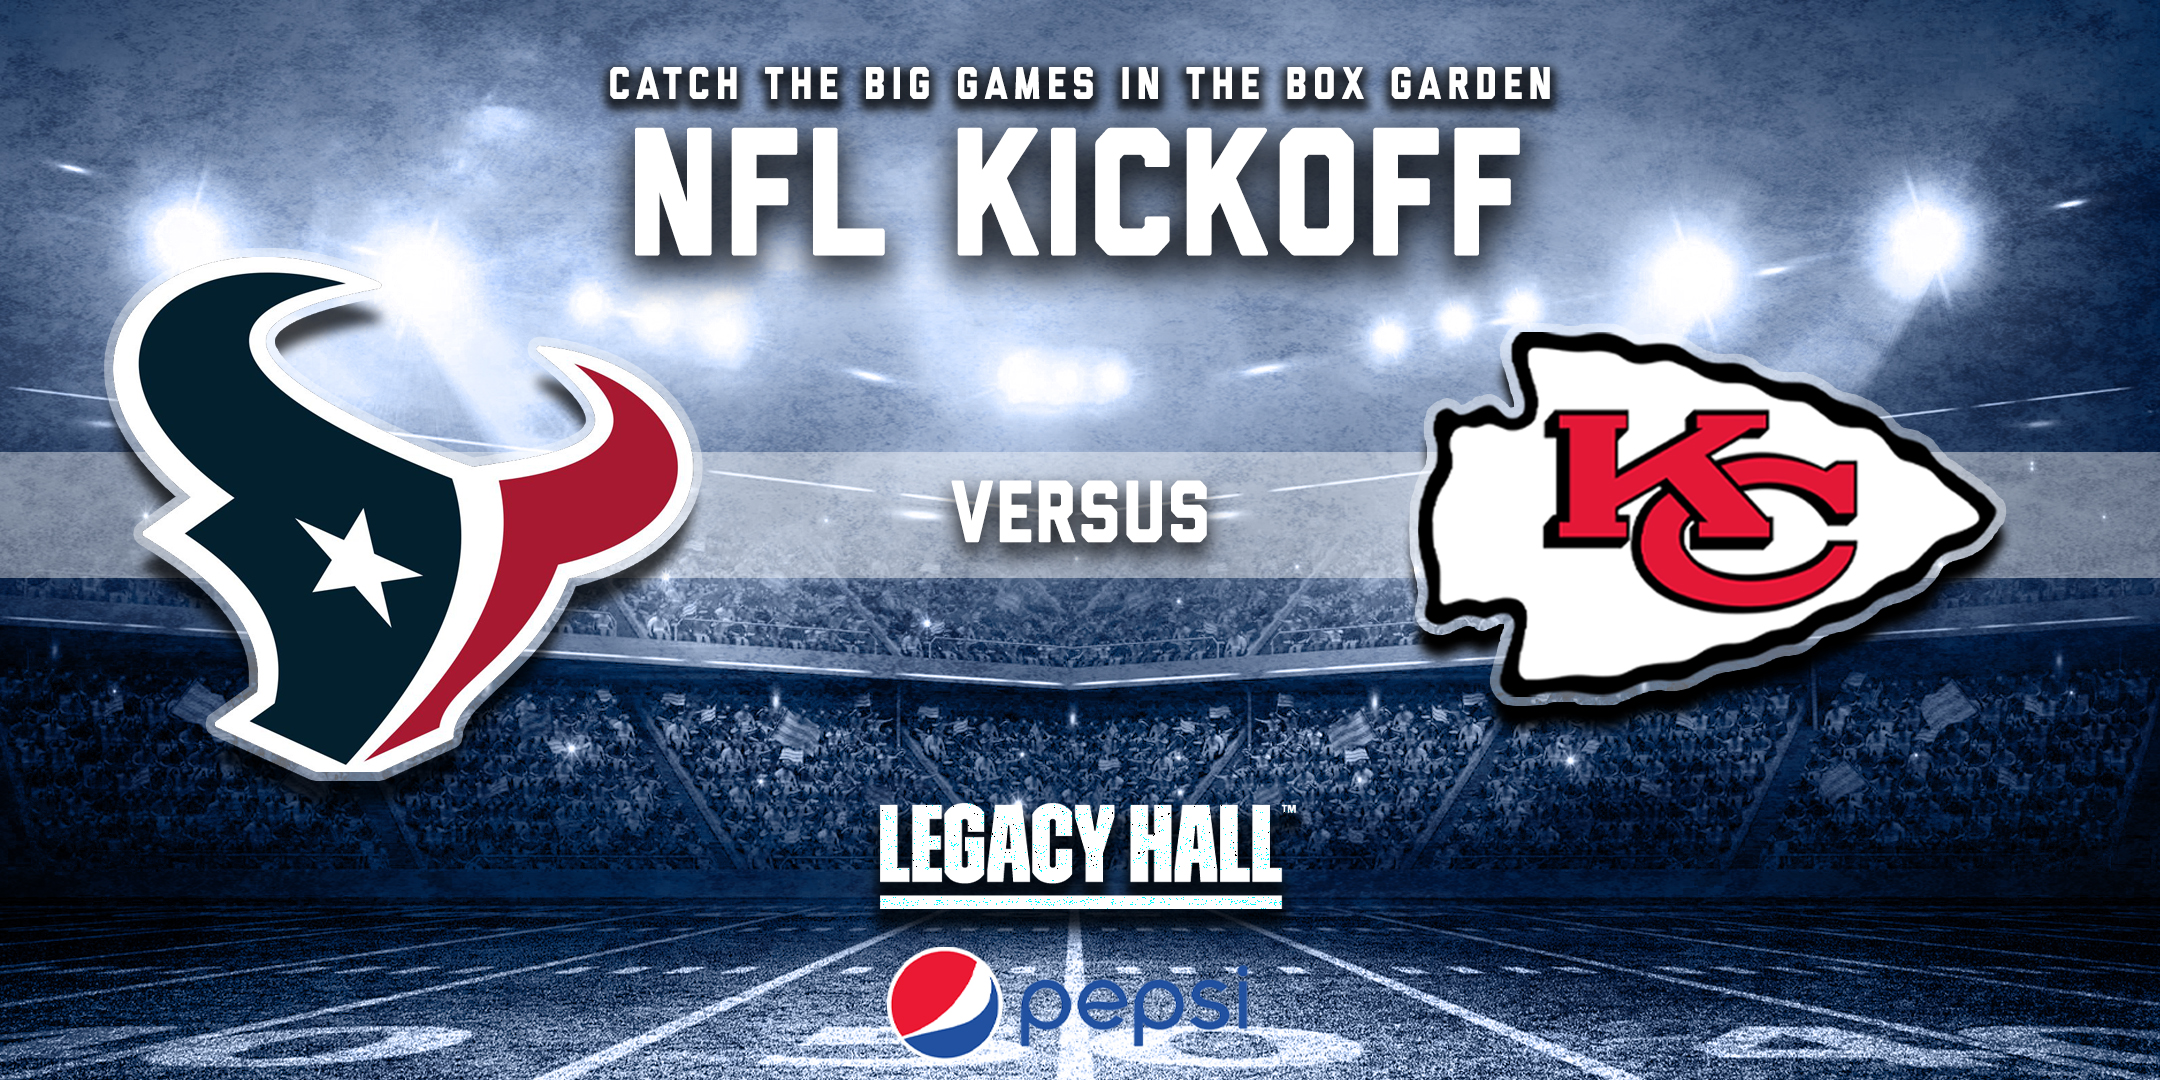 NFL Kickoff Watch Party: Texans vs. Chiefs - hero